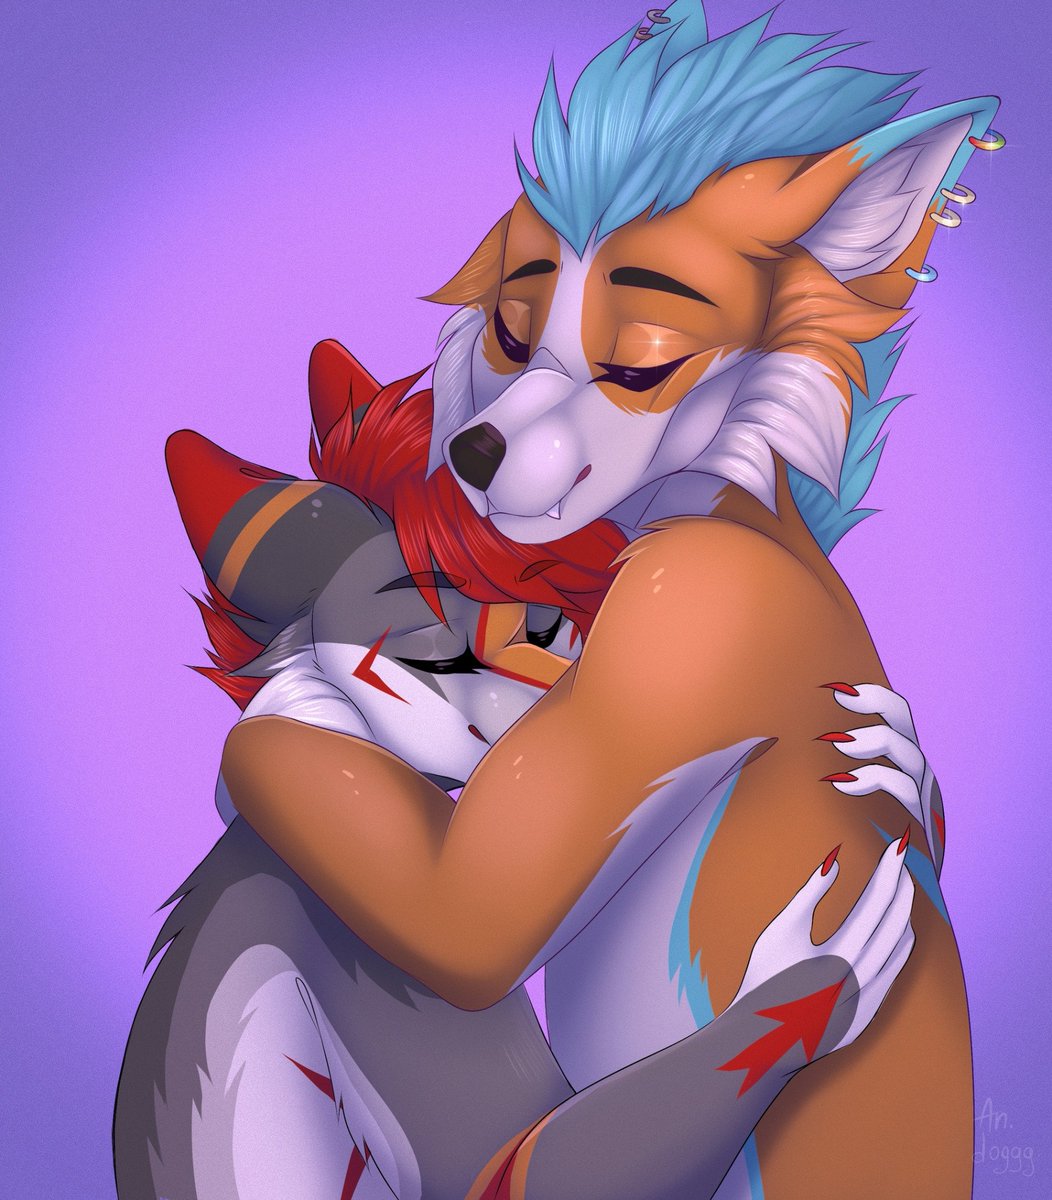 Hugs - the best emotional support 🤗😍♥️

🎨 Art by Angry_doggg (FurAffinity)